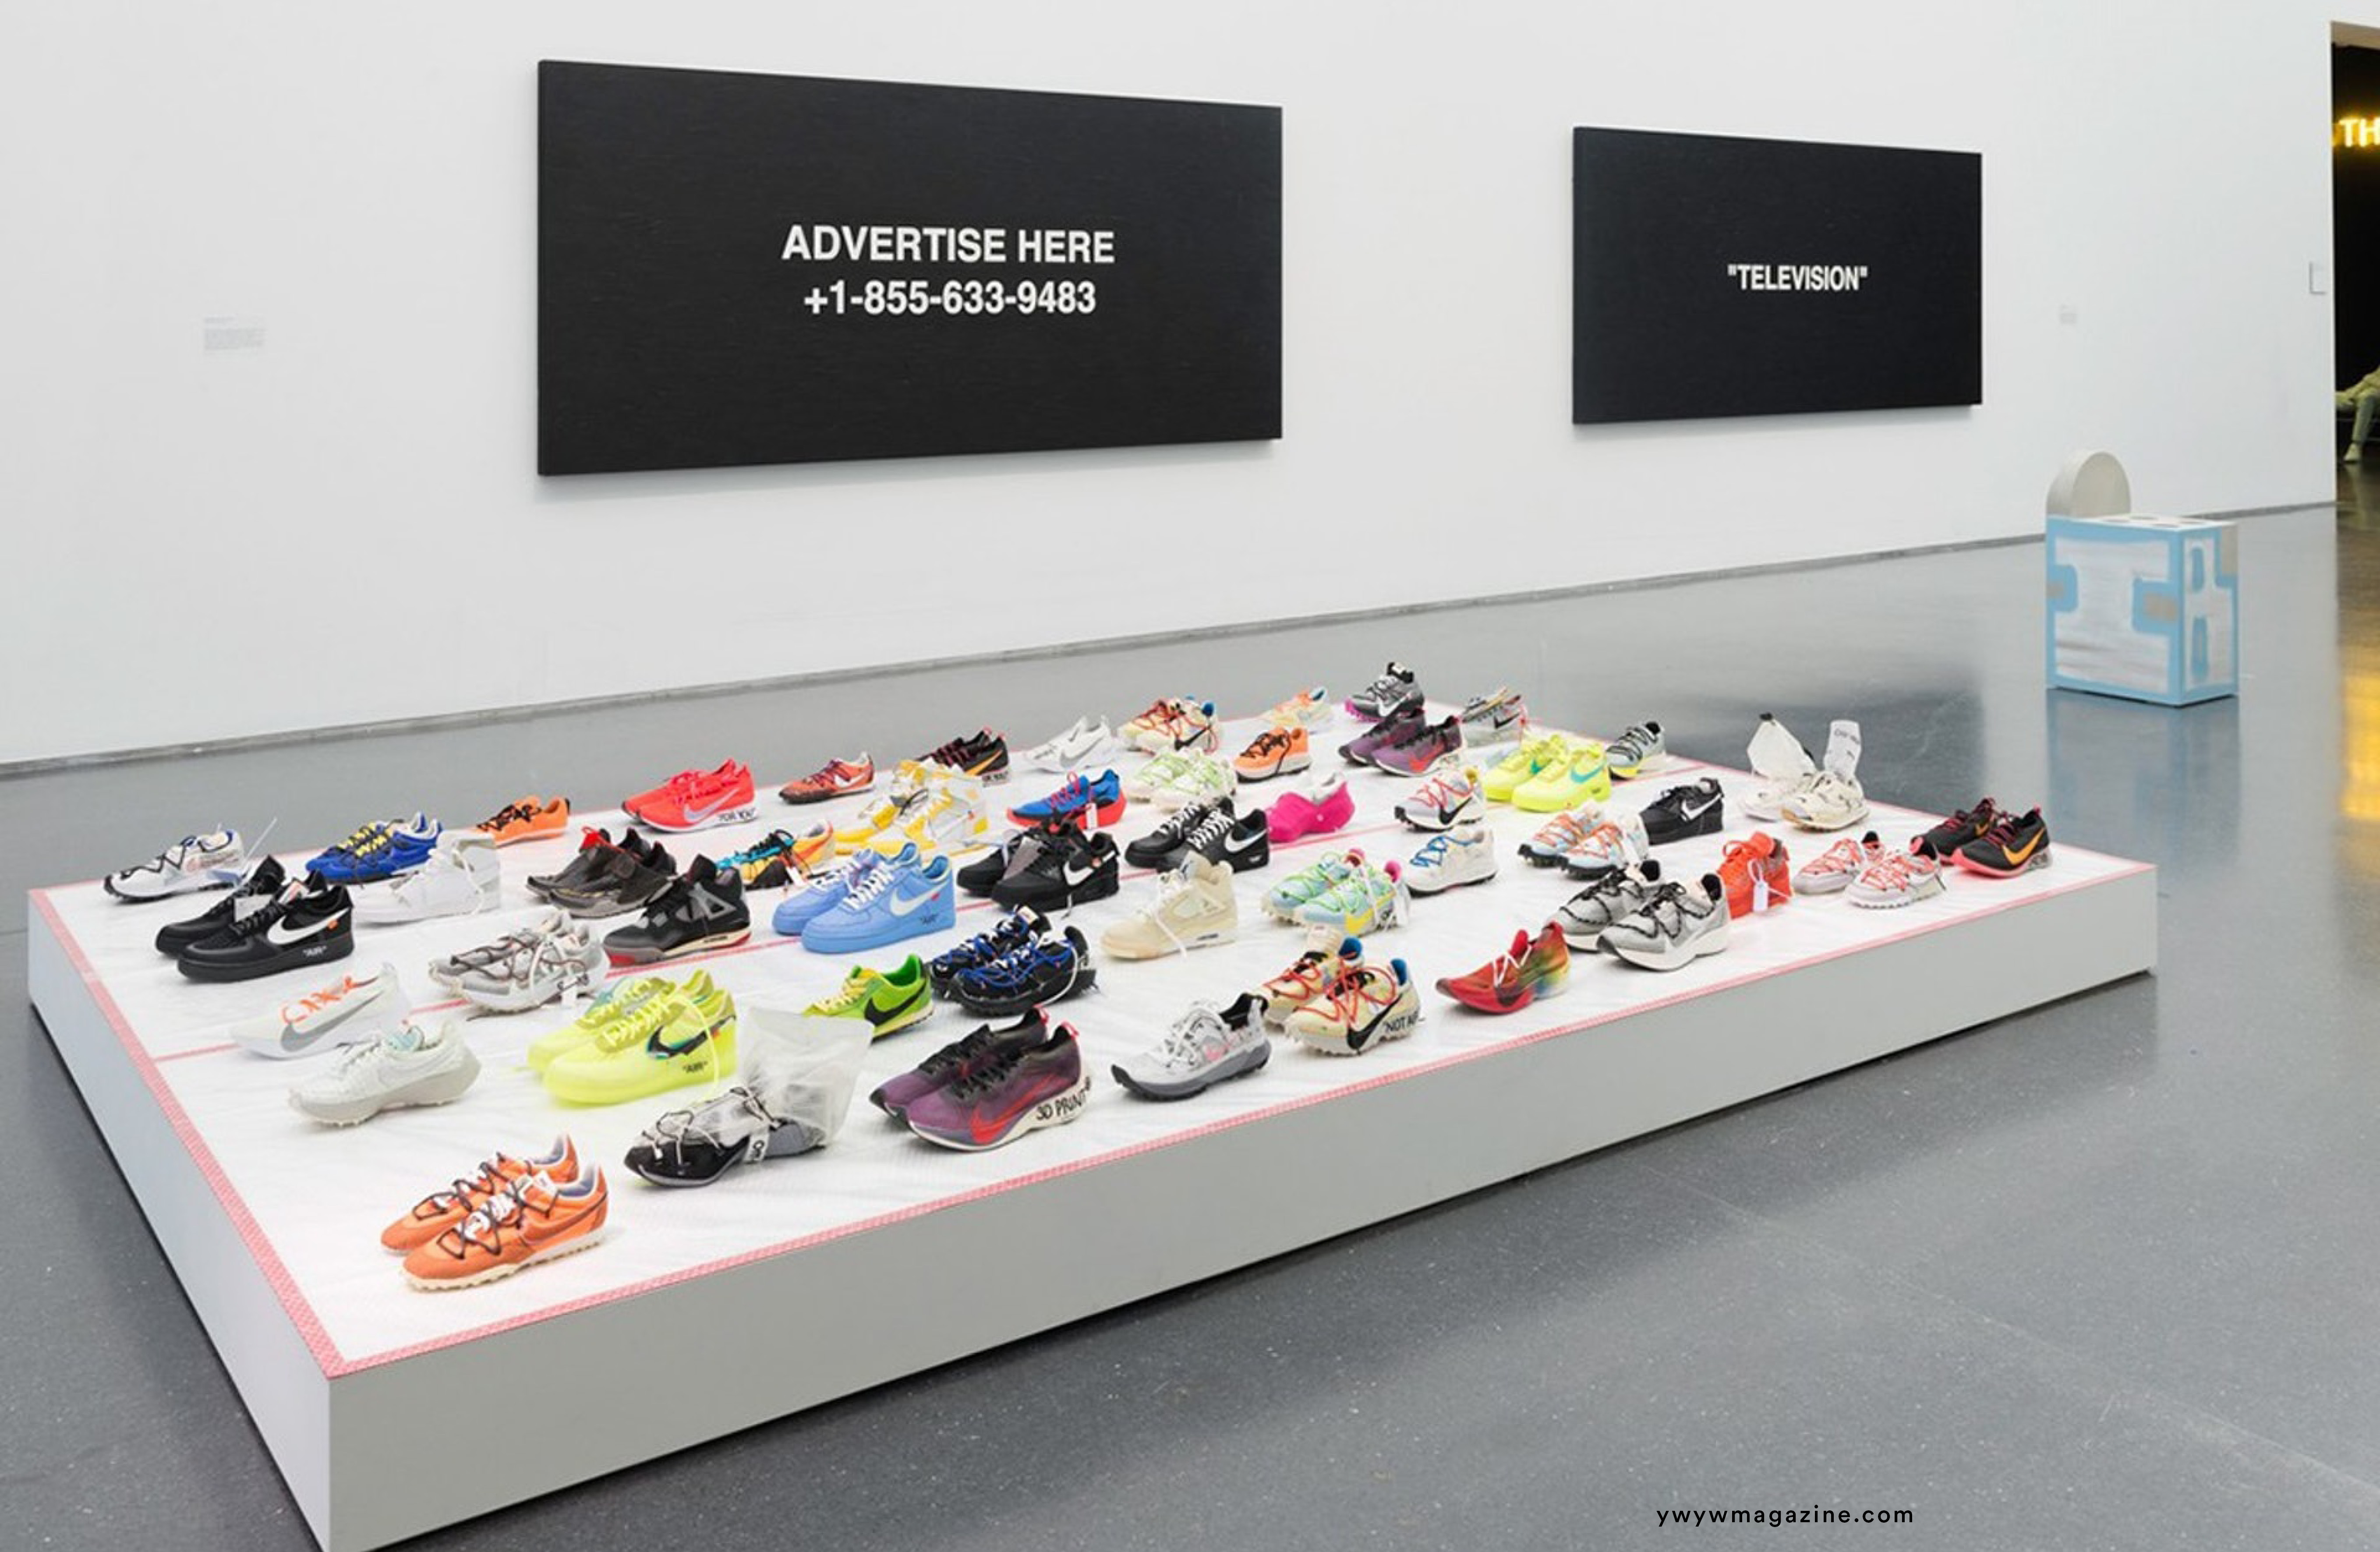 Figures of Speech: Virgil Abloh's first solo art exhibition at the